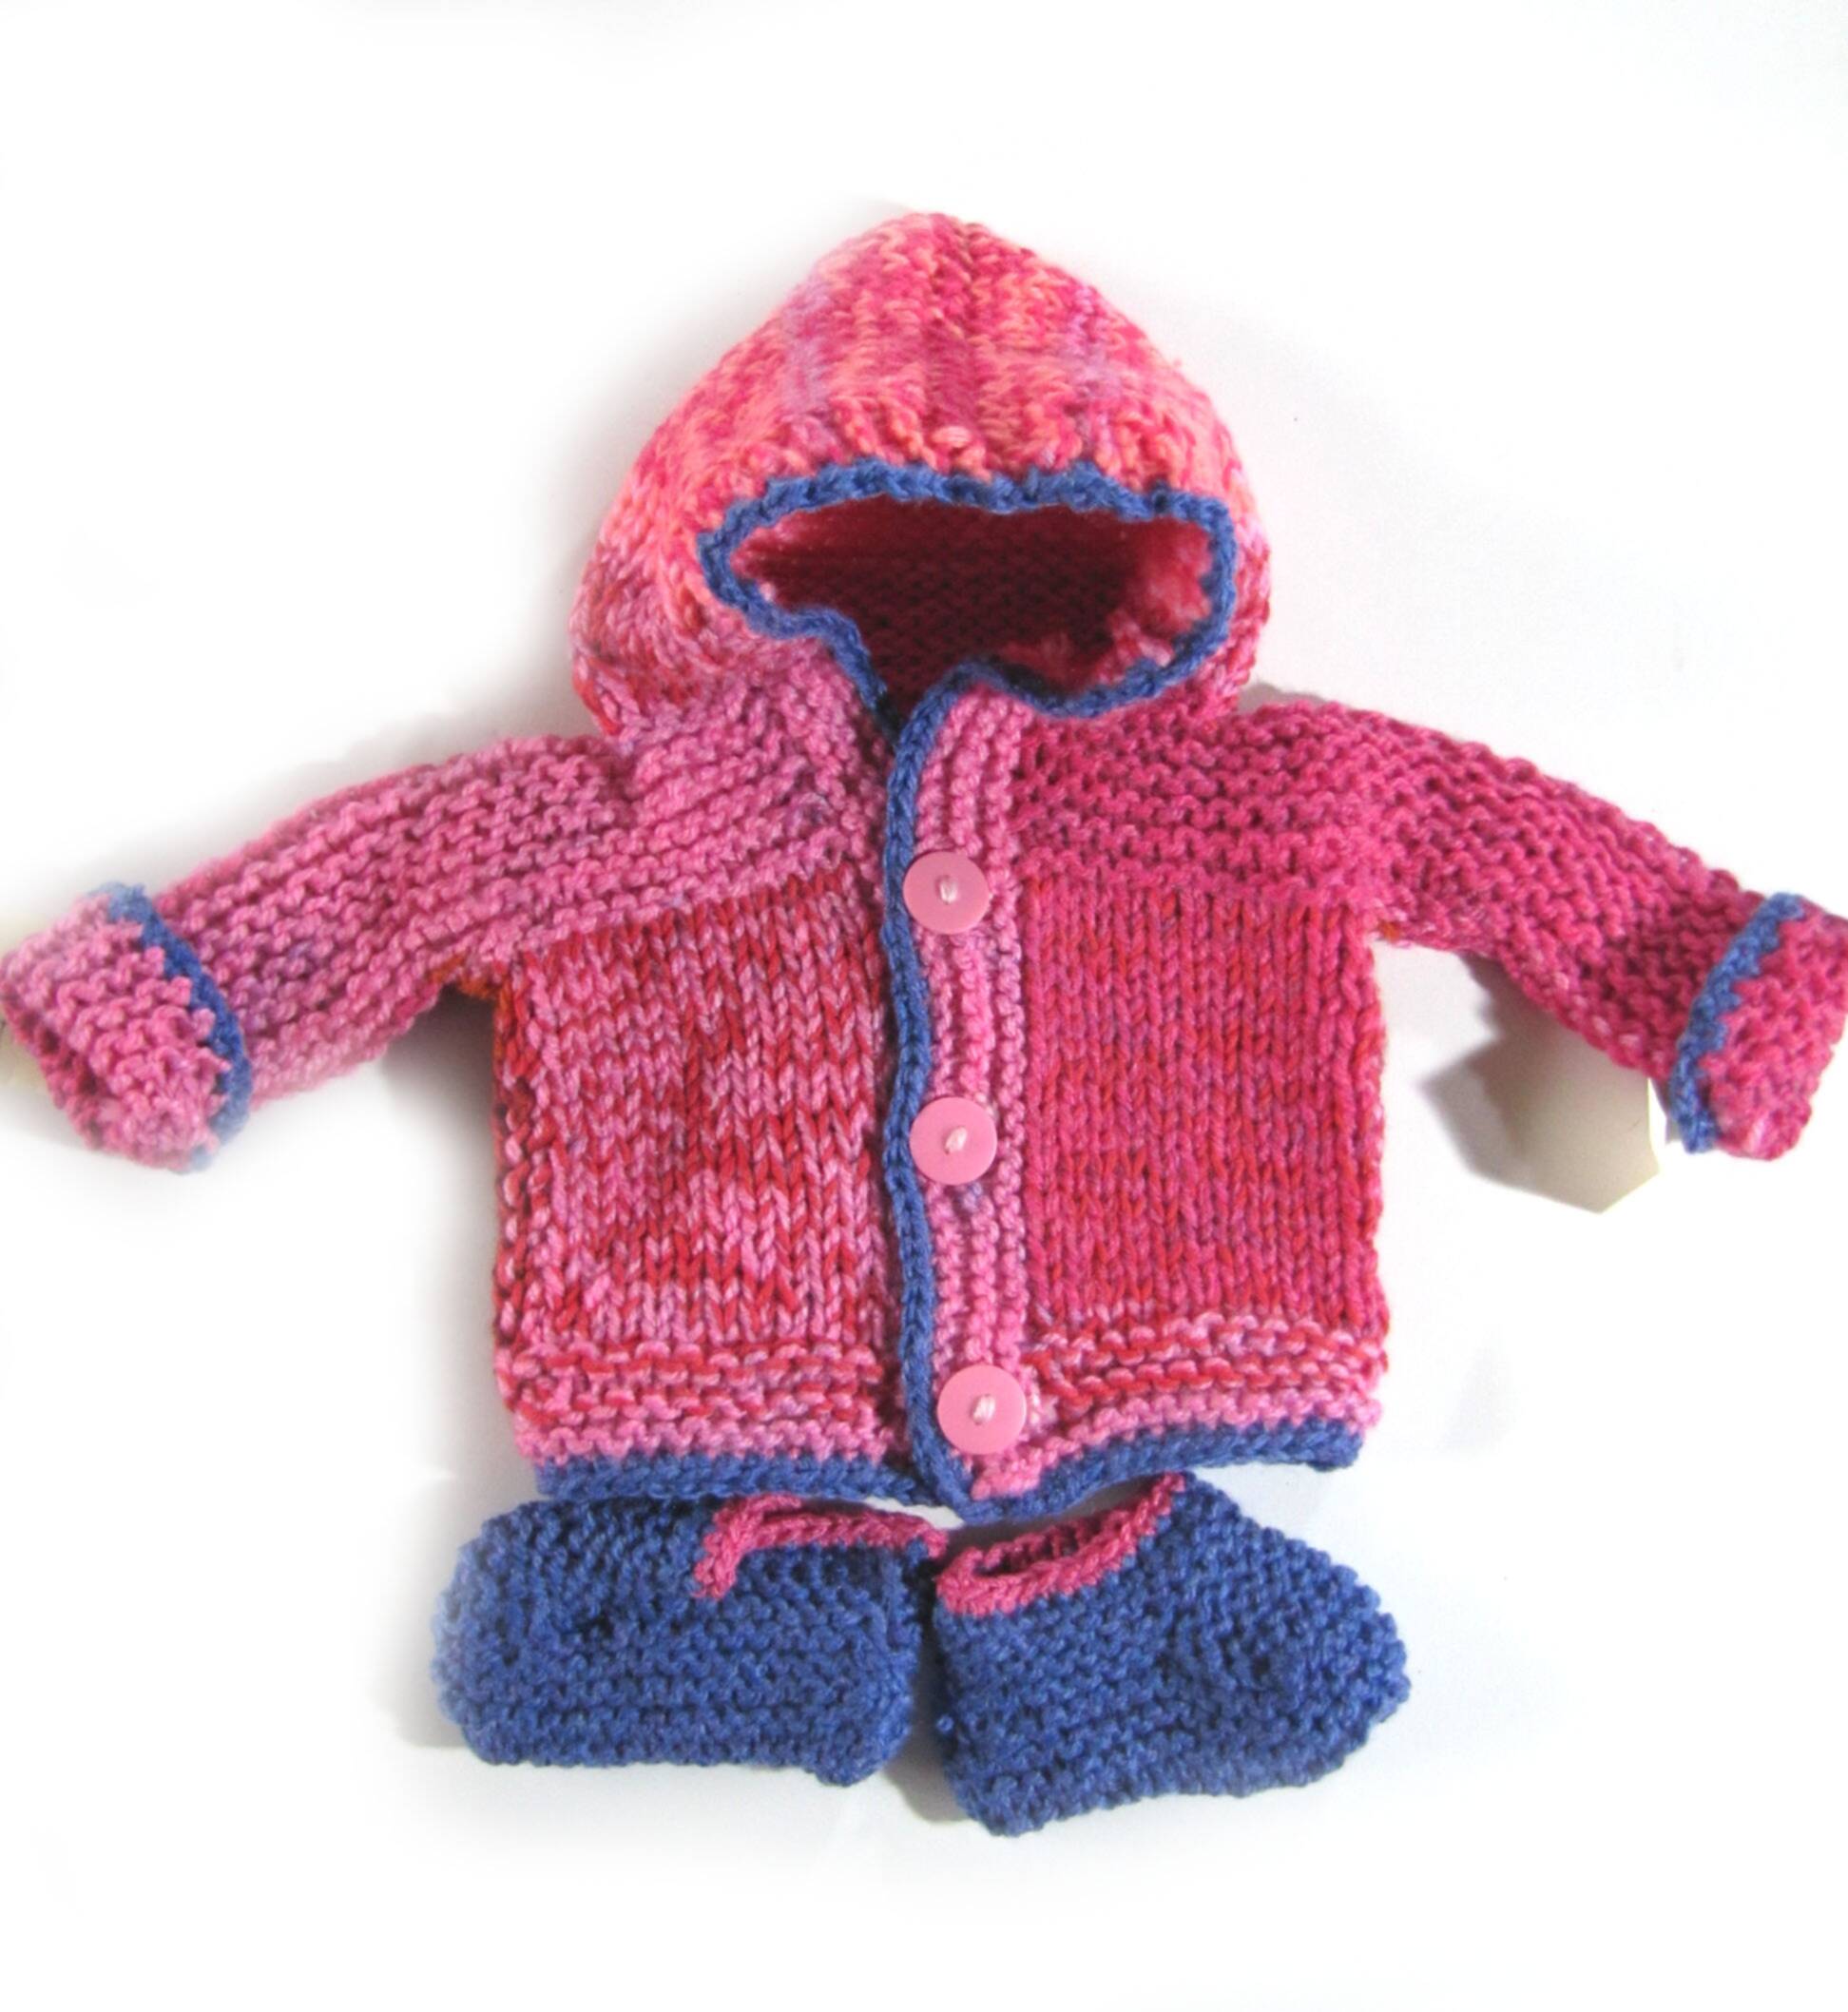 KSS Dark Pink Hooded Baby Sweater & Booties (3 Months) SW-668 - Click Image to Close